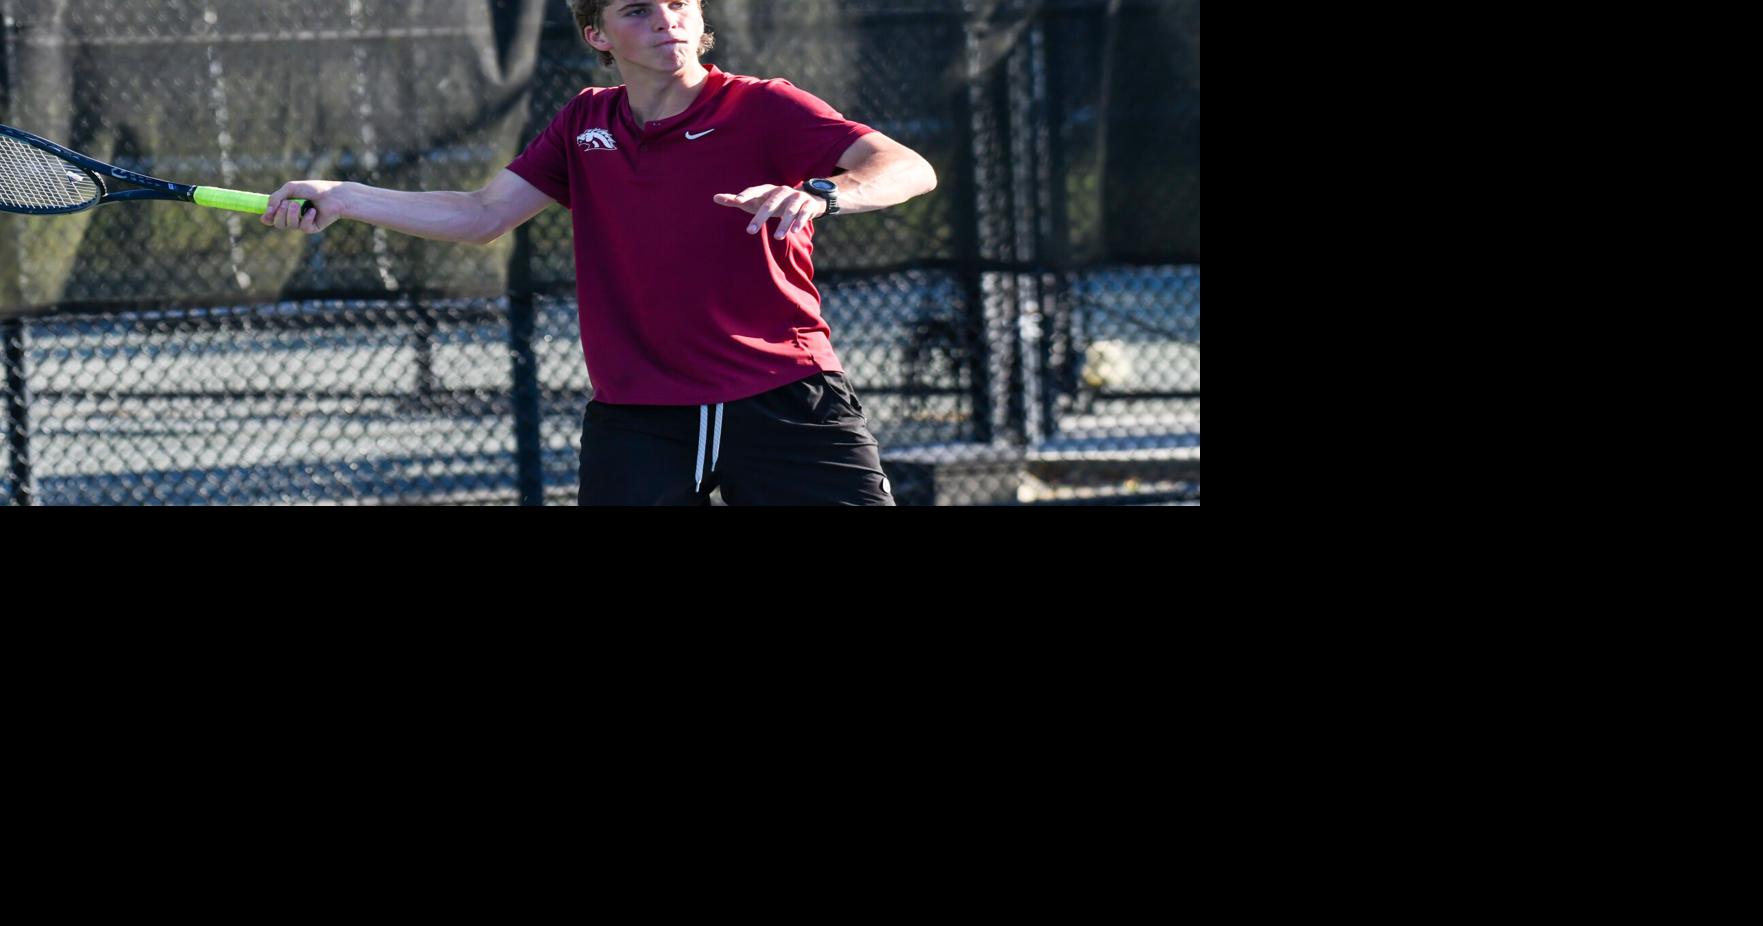 South Aiken boys’ tennis team with limited players knocked out in 3rd playoff round | Local Sports